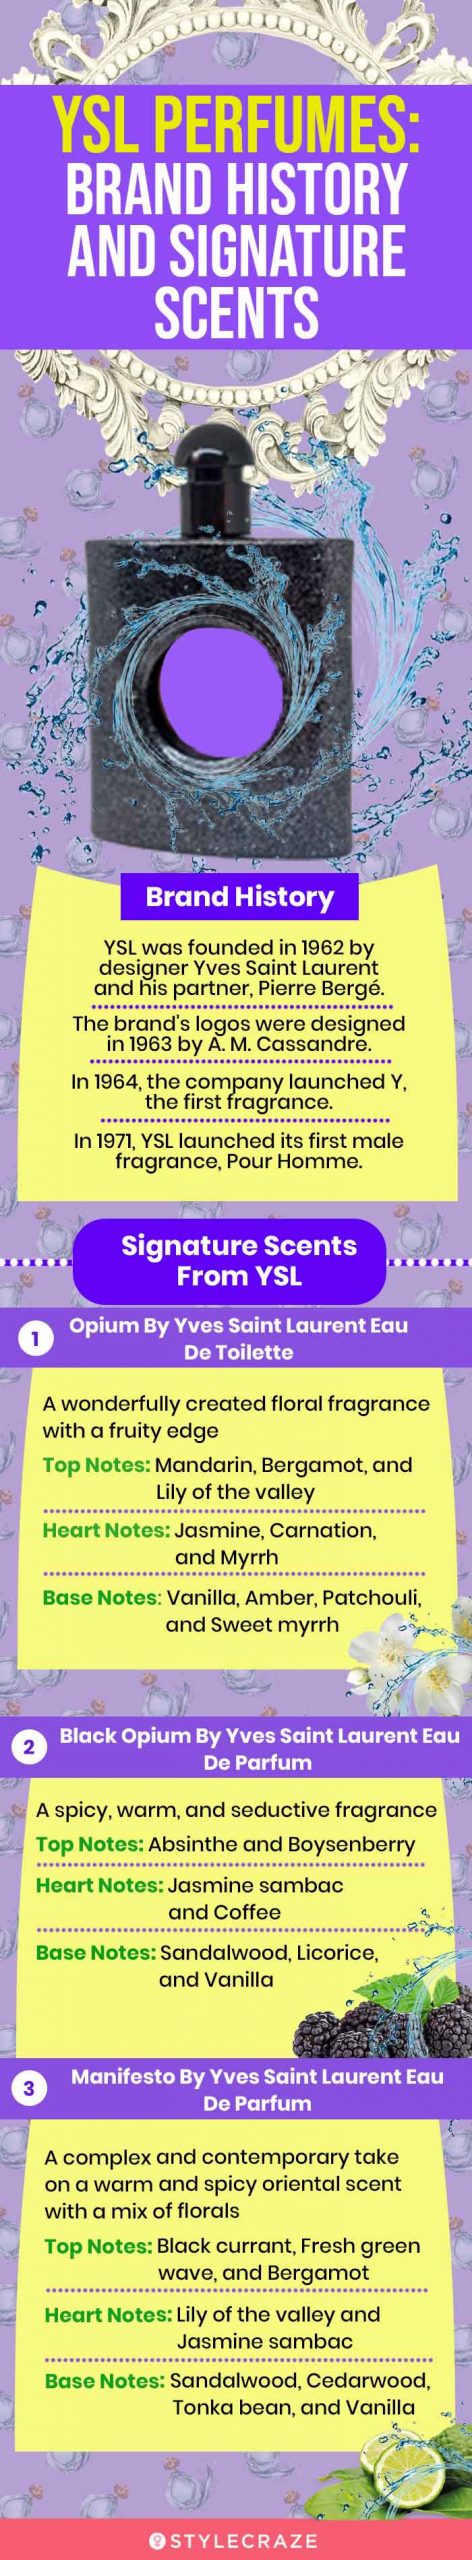 YSL Perfumes: Brand History and Signature Scents